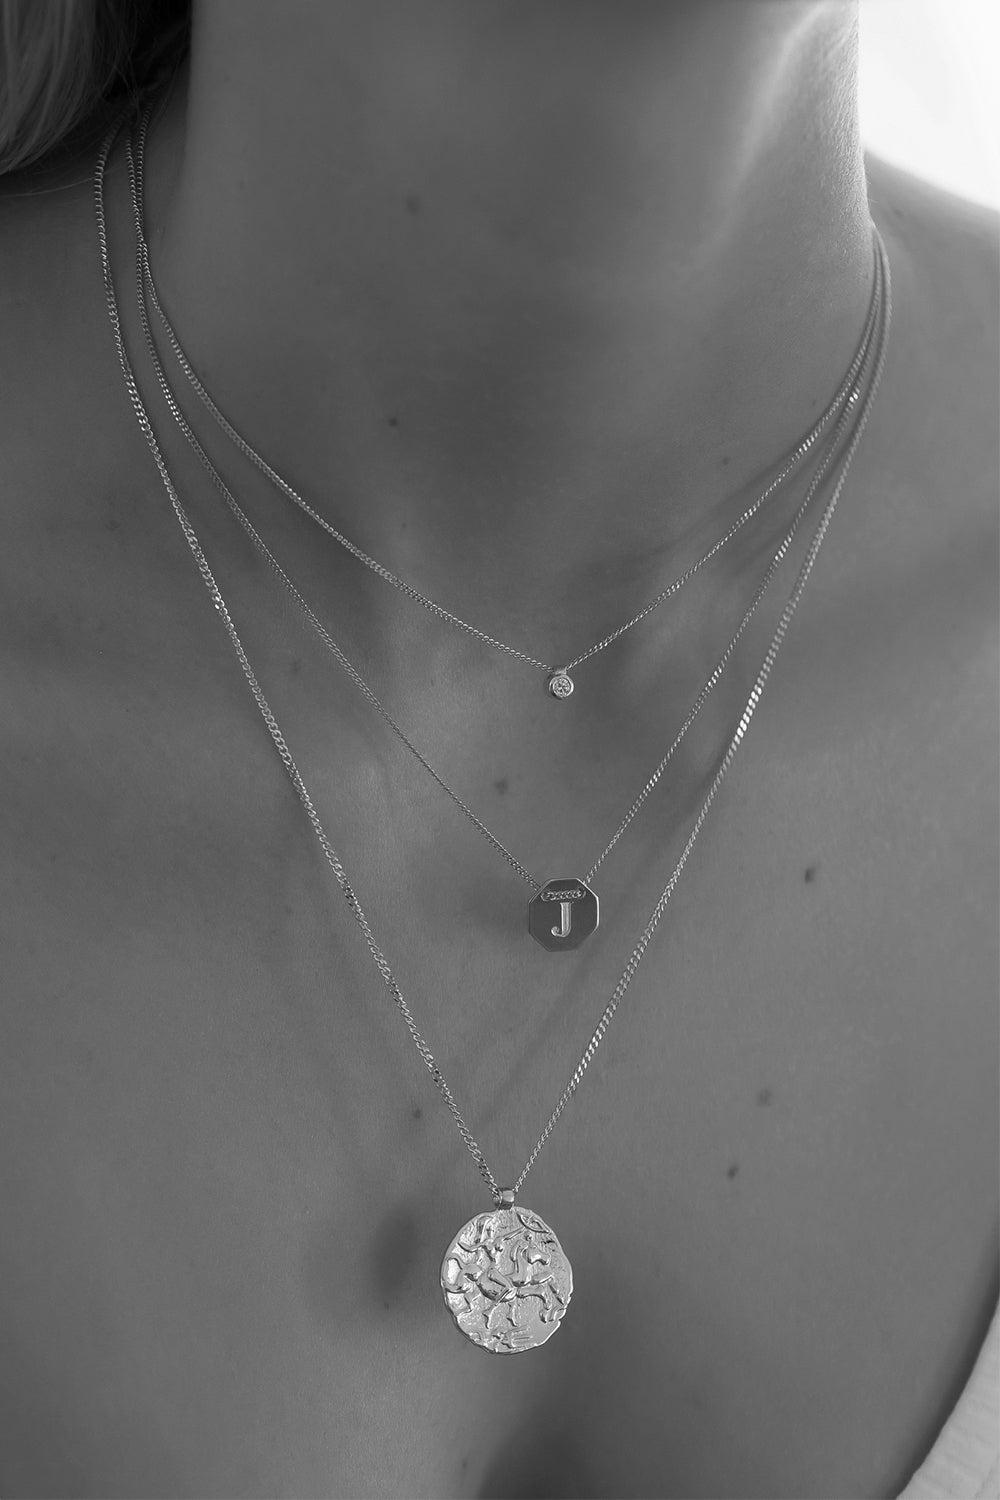 Coin Necklace | Silver or 9K White Gold, More Options Available